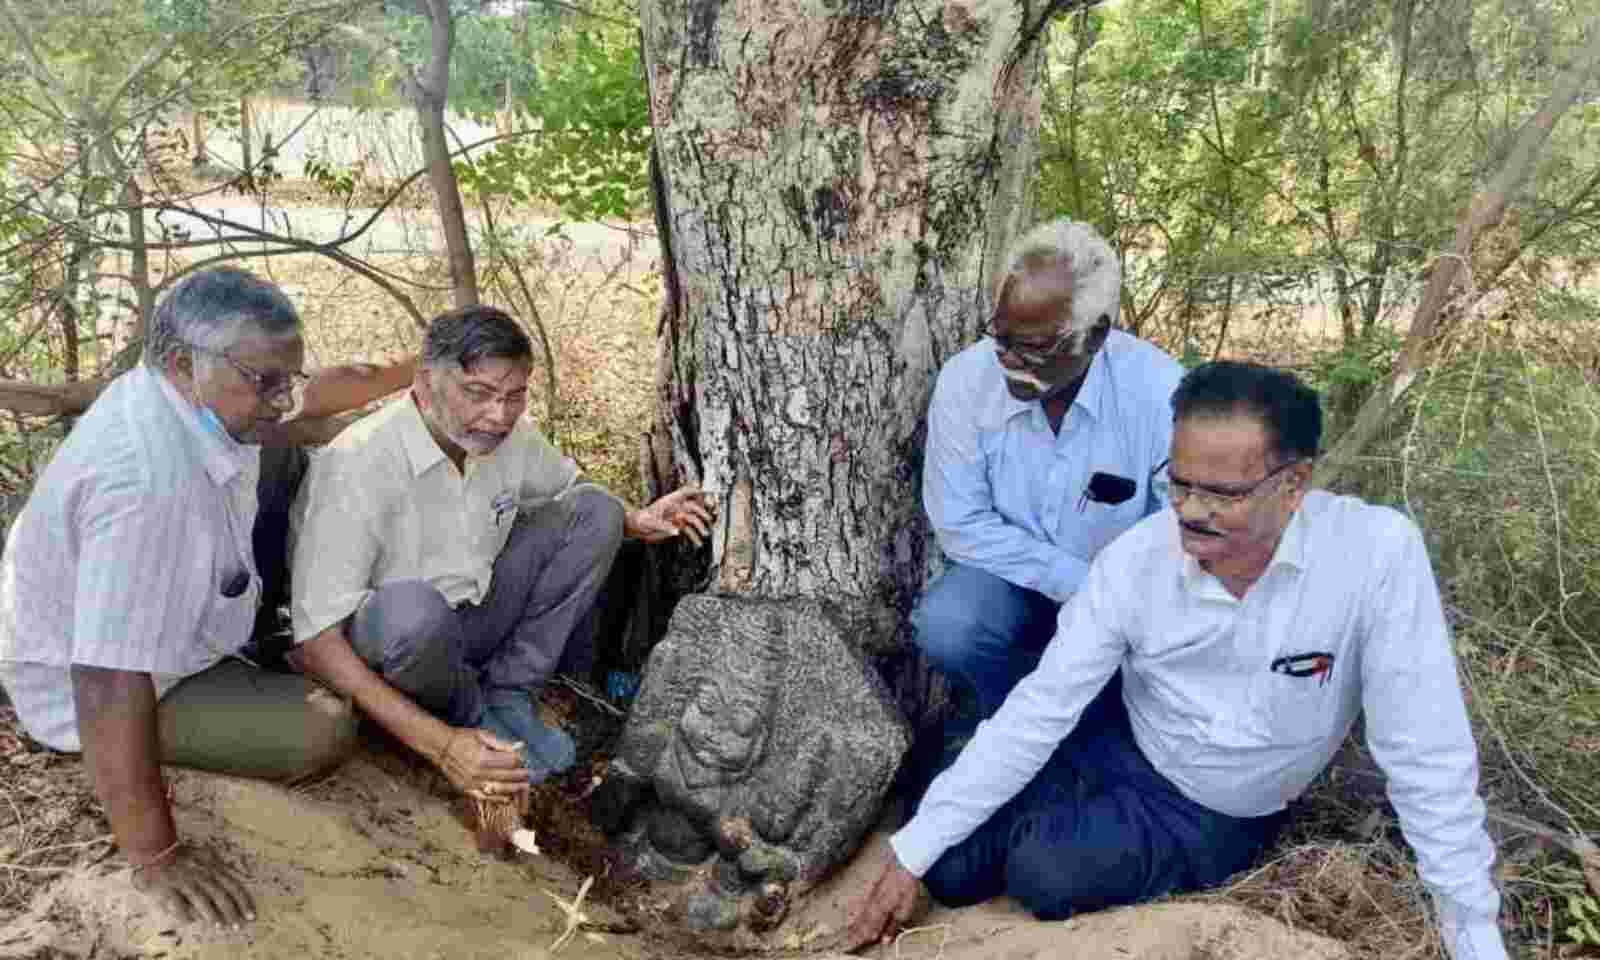 1,000-Year-Old Jaina Sculptures Discovered near Hyderabad, Telangana: Largest 'Dwarapala' Sculpture Found in Siddipet